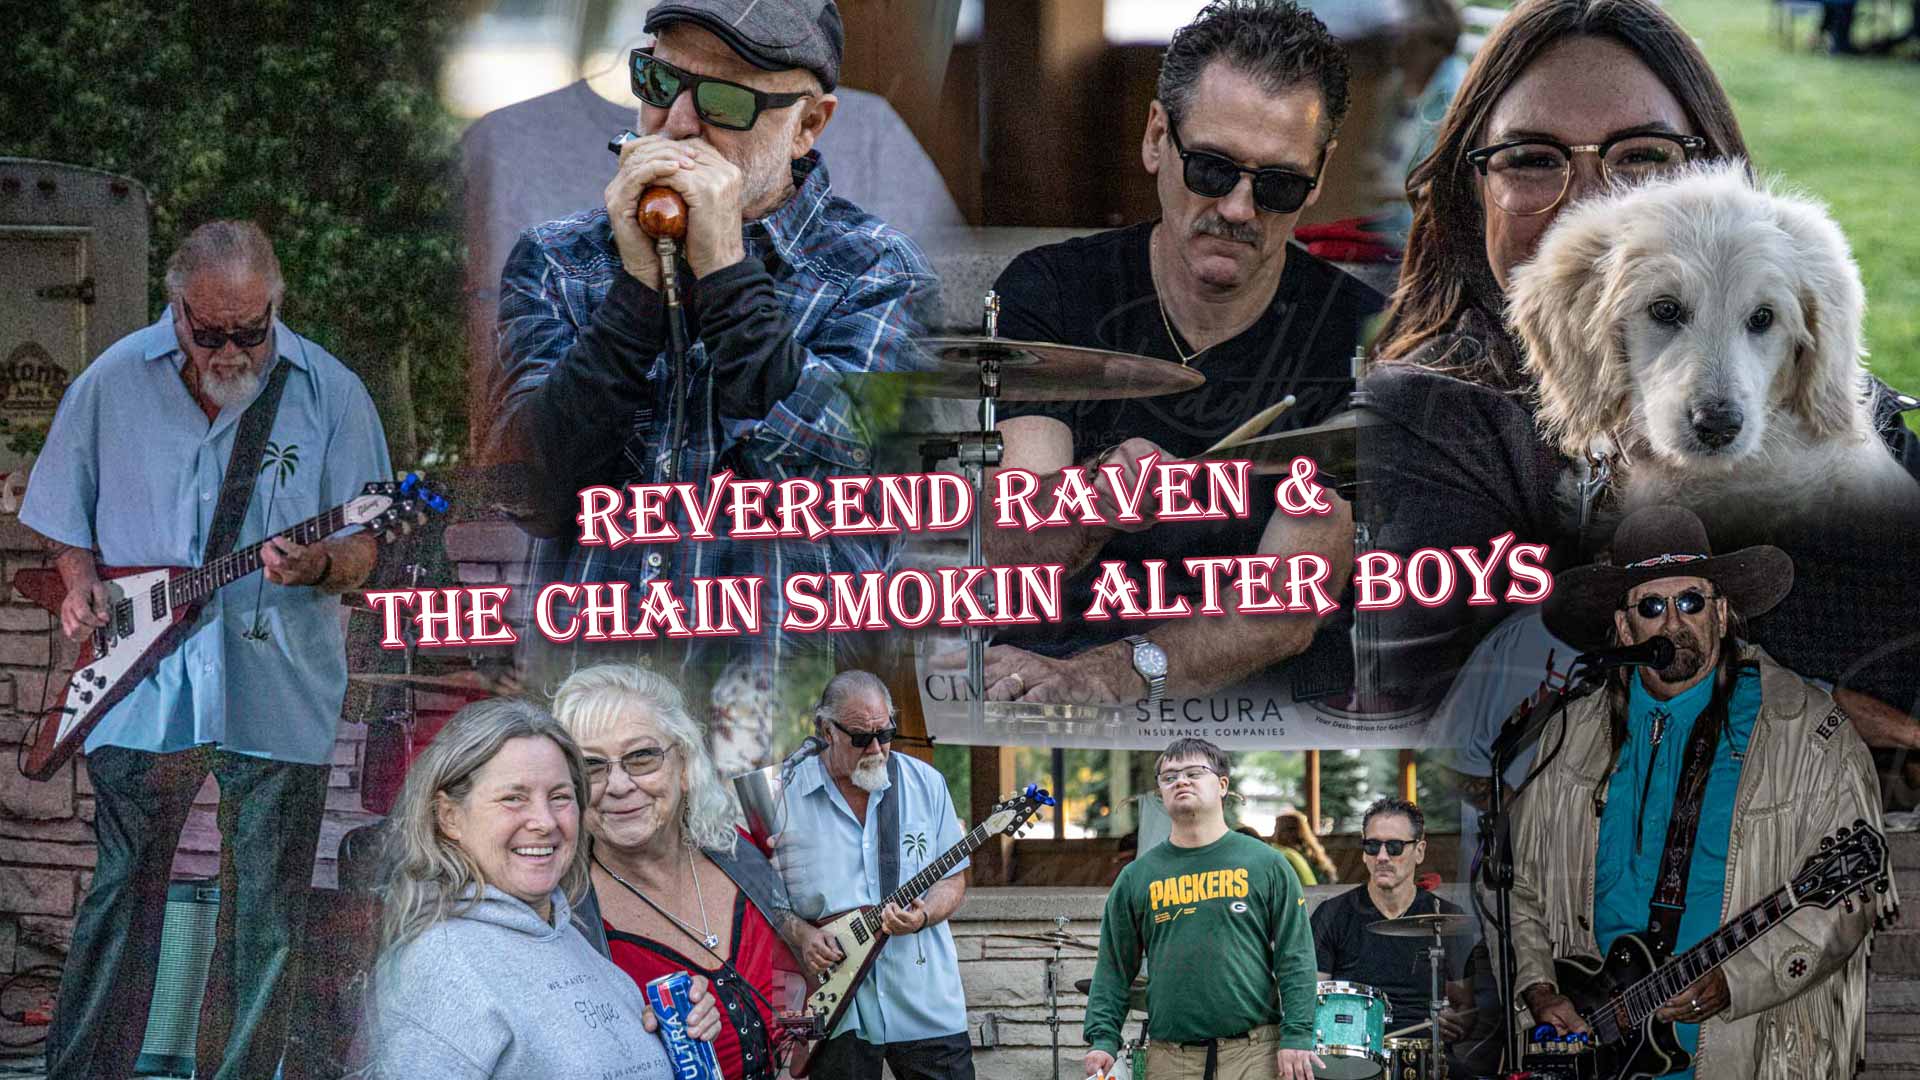 Reverend Raven and the Chain Smoking Alter Boys